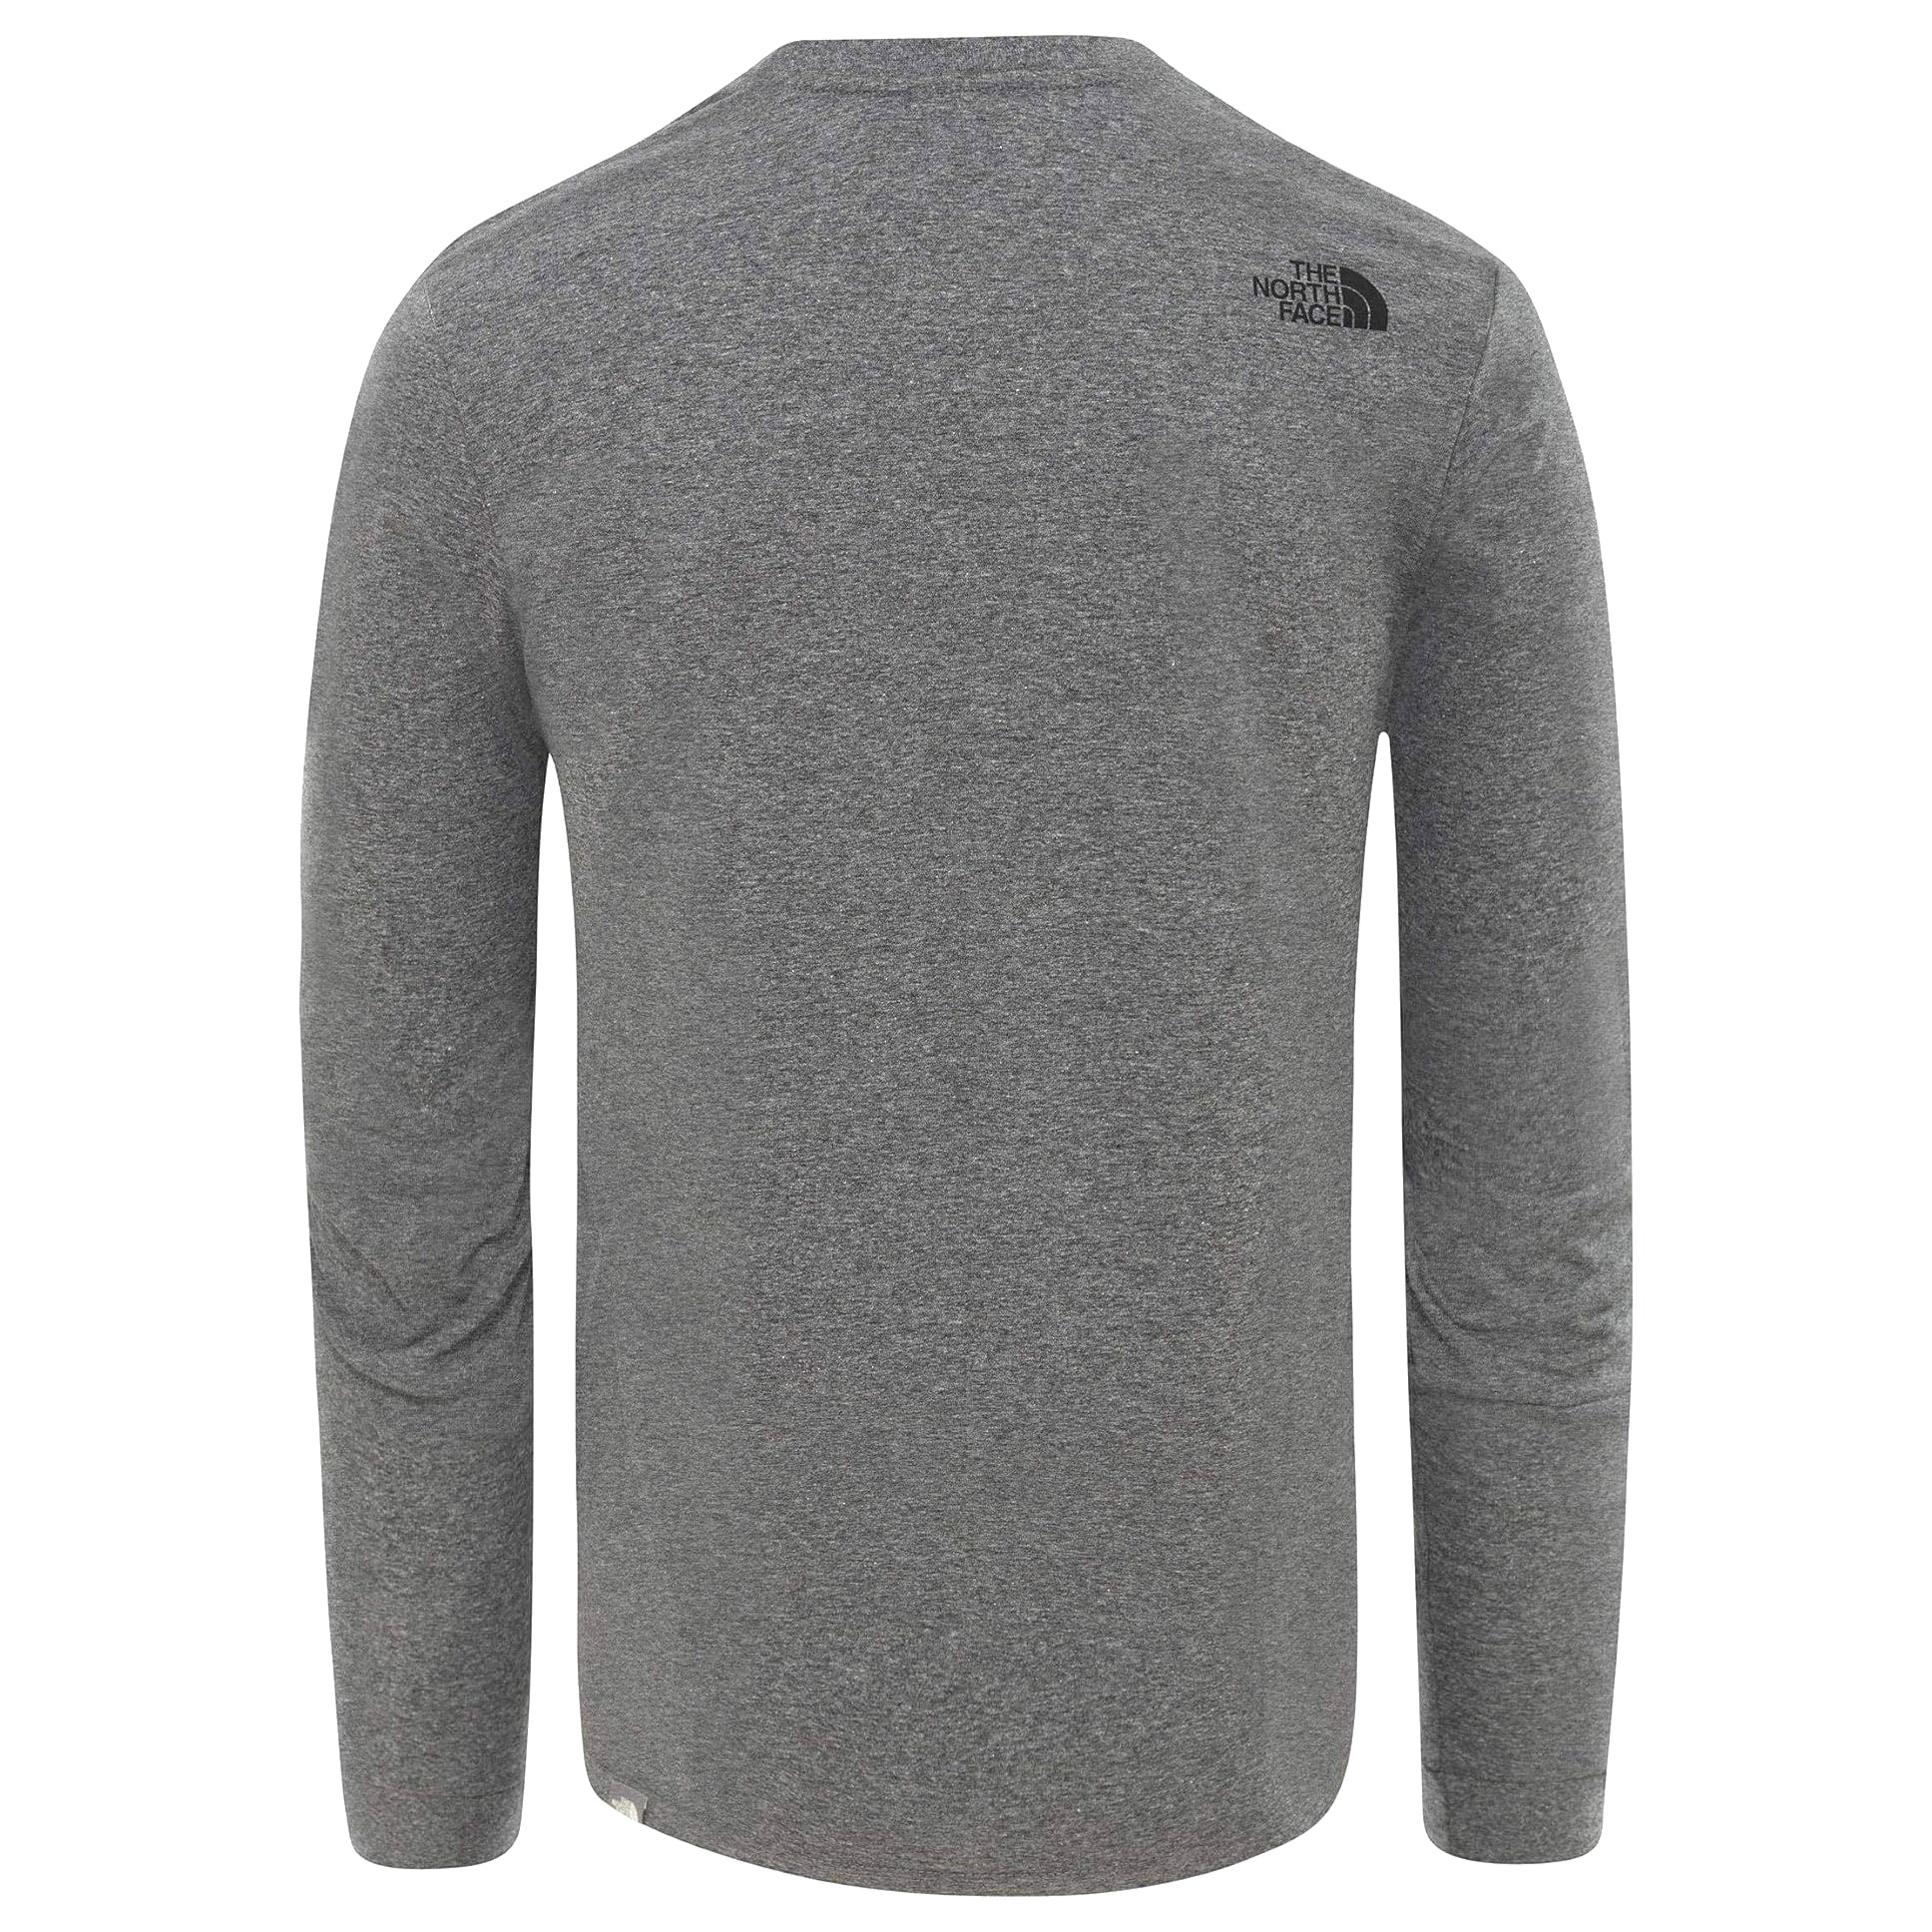 North Face Simple Dome Ls Tee